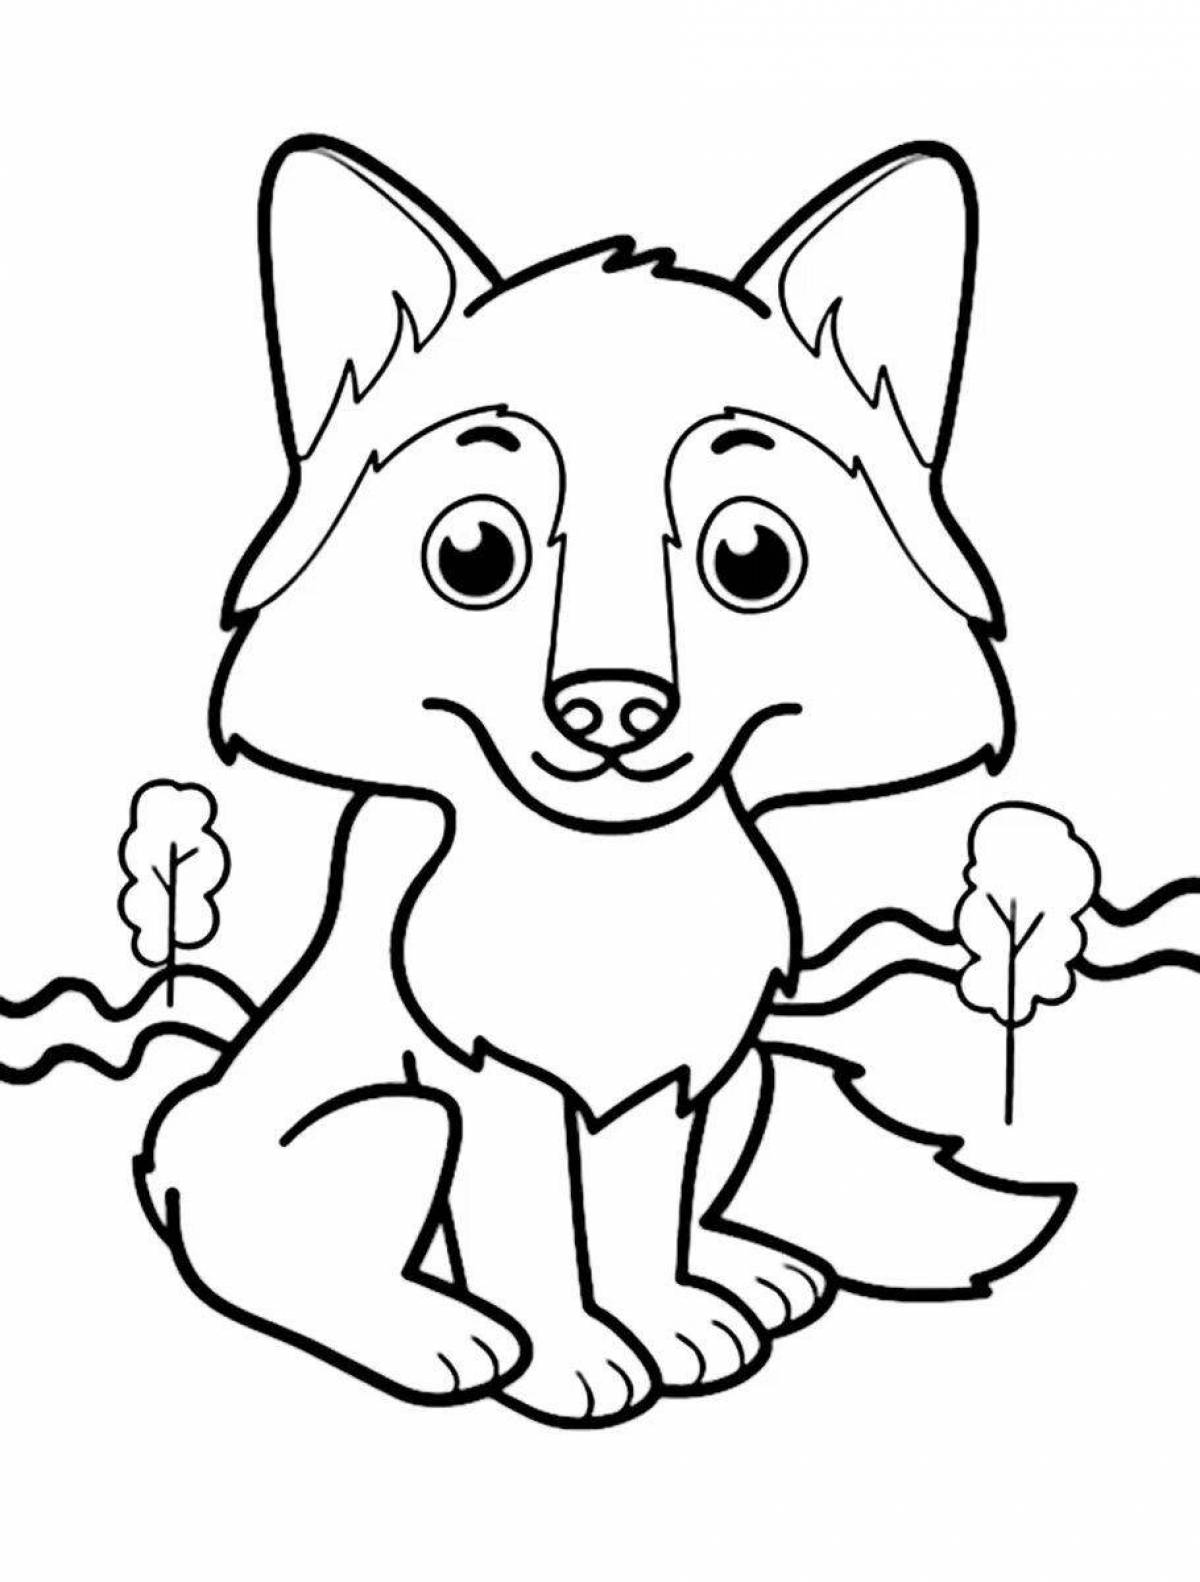 Exquisite animal coloring pages for kids